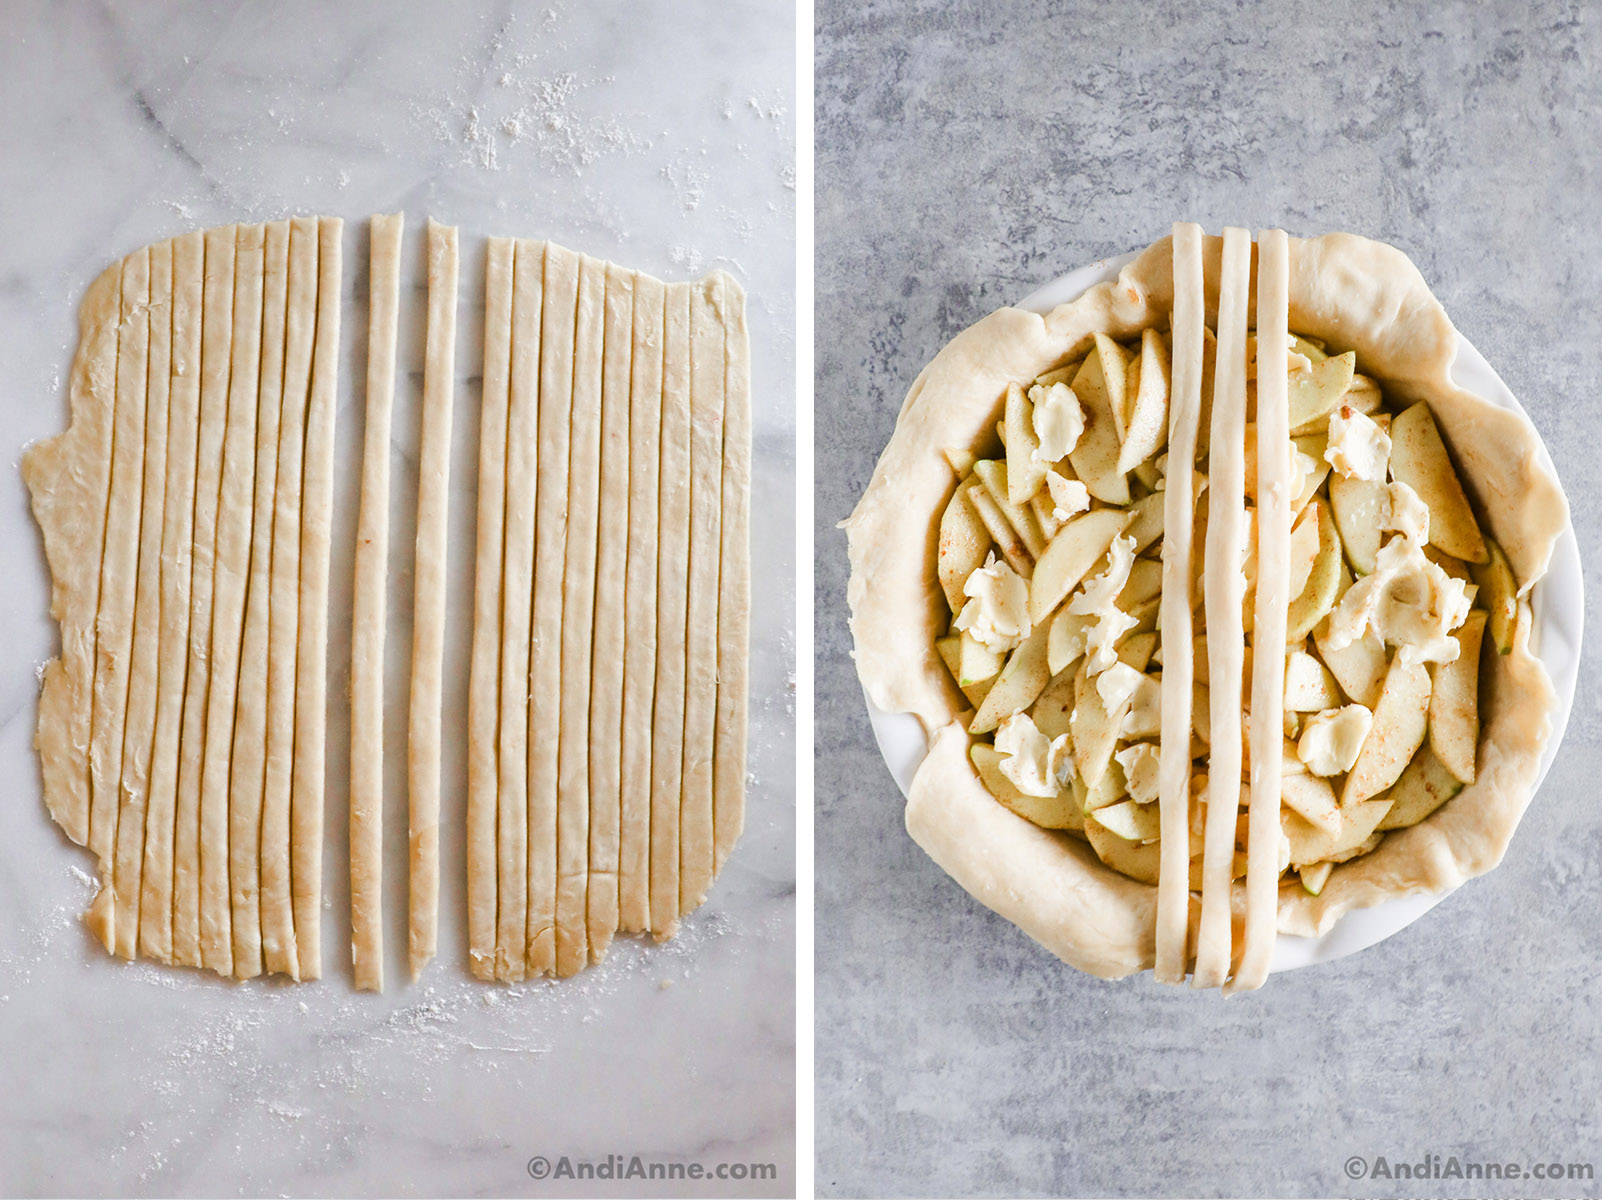 Strips of pastry dough and three strips on top of unbaked apple pie.